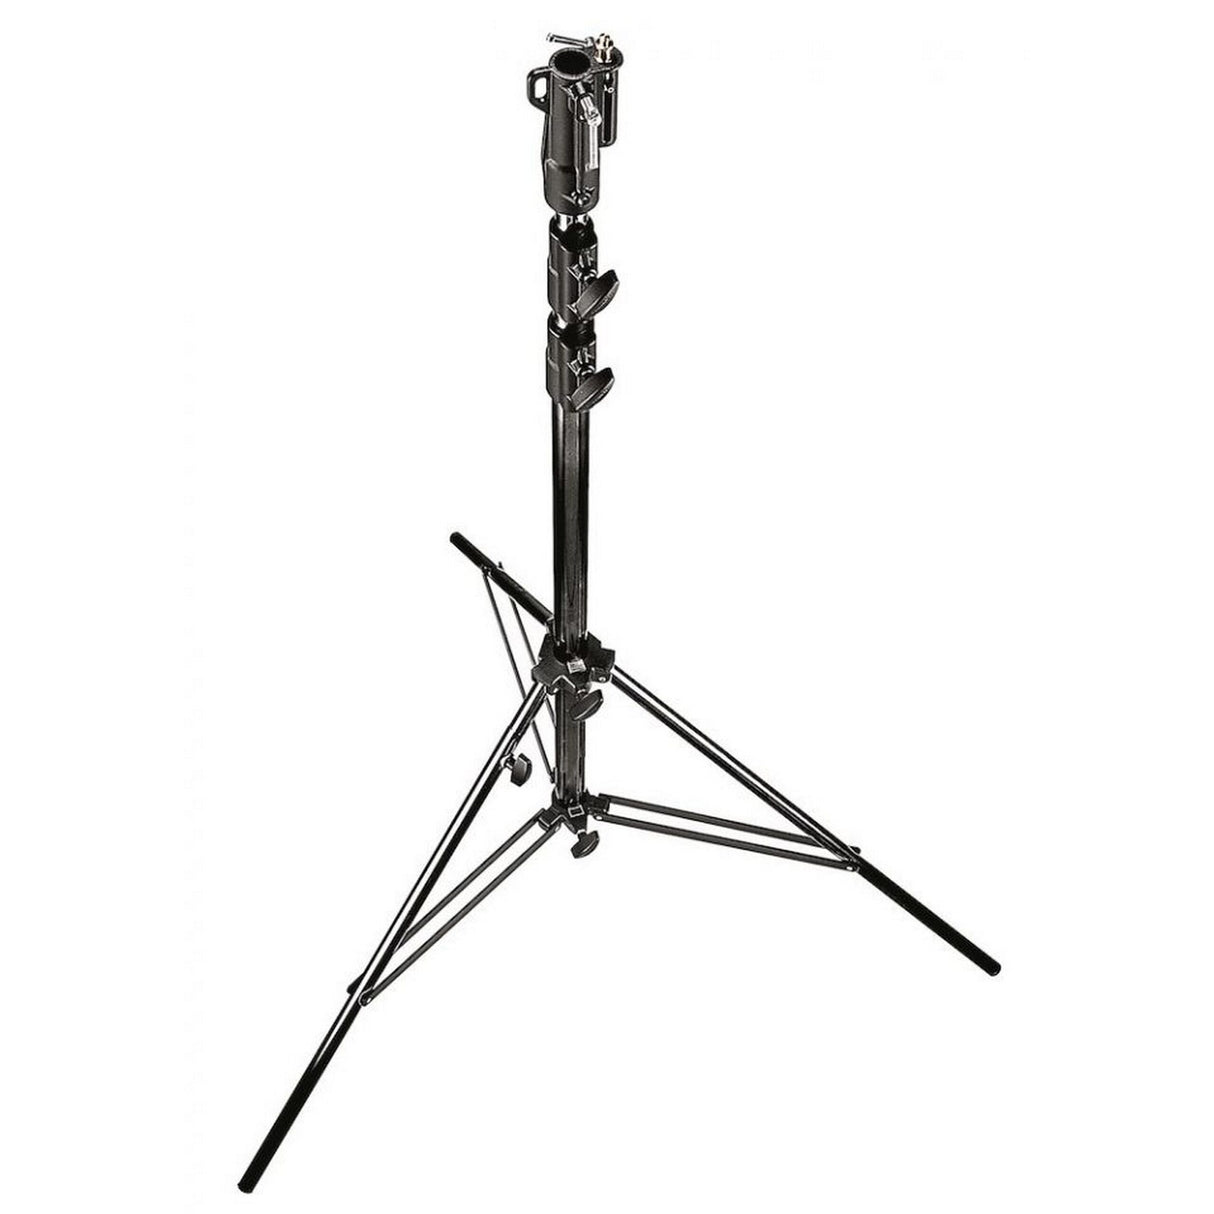 Manfrotto 126BSUAC Steel Air-Cushioned Stand with Leveling Leg, Black